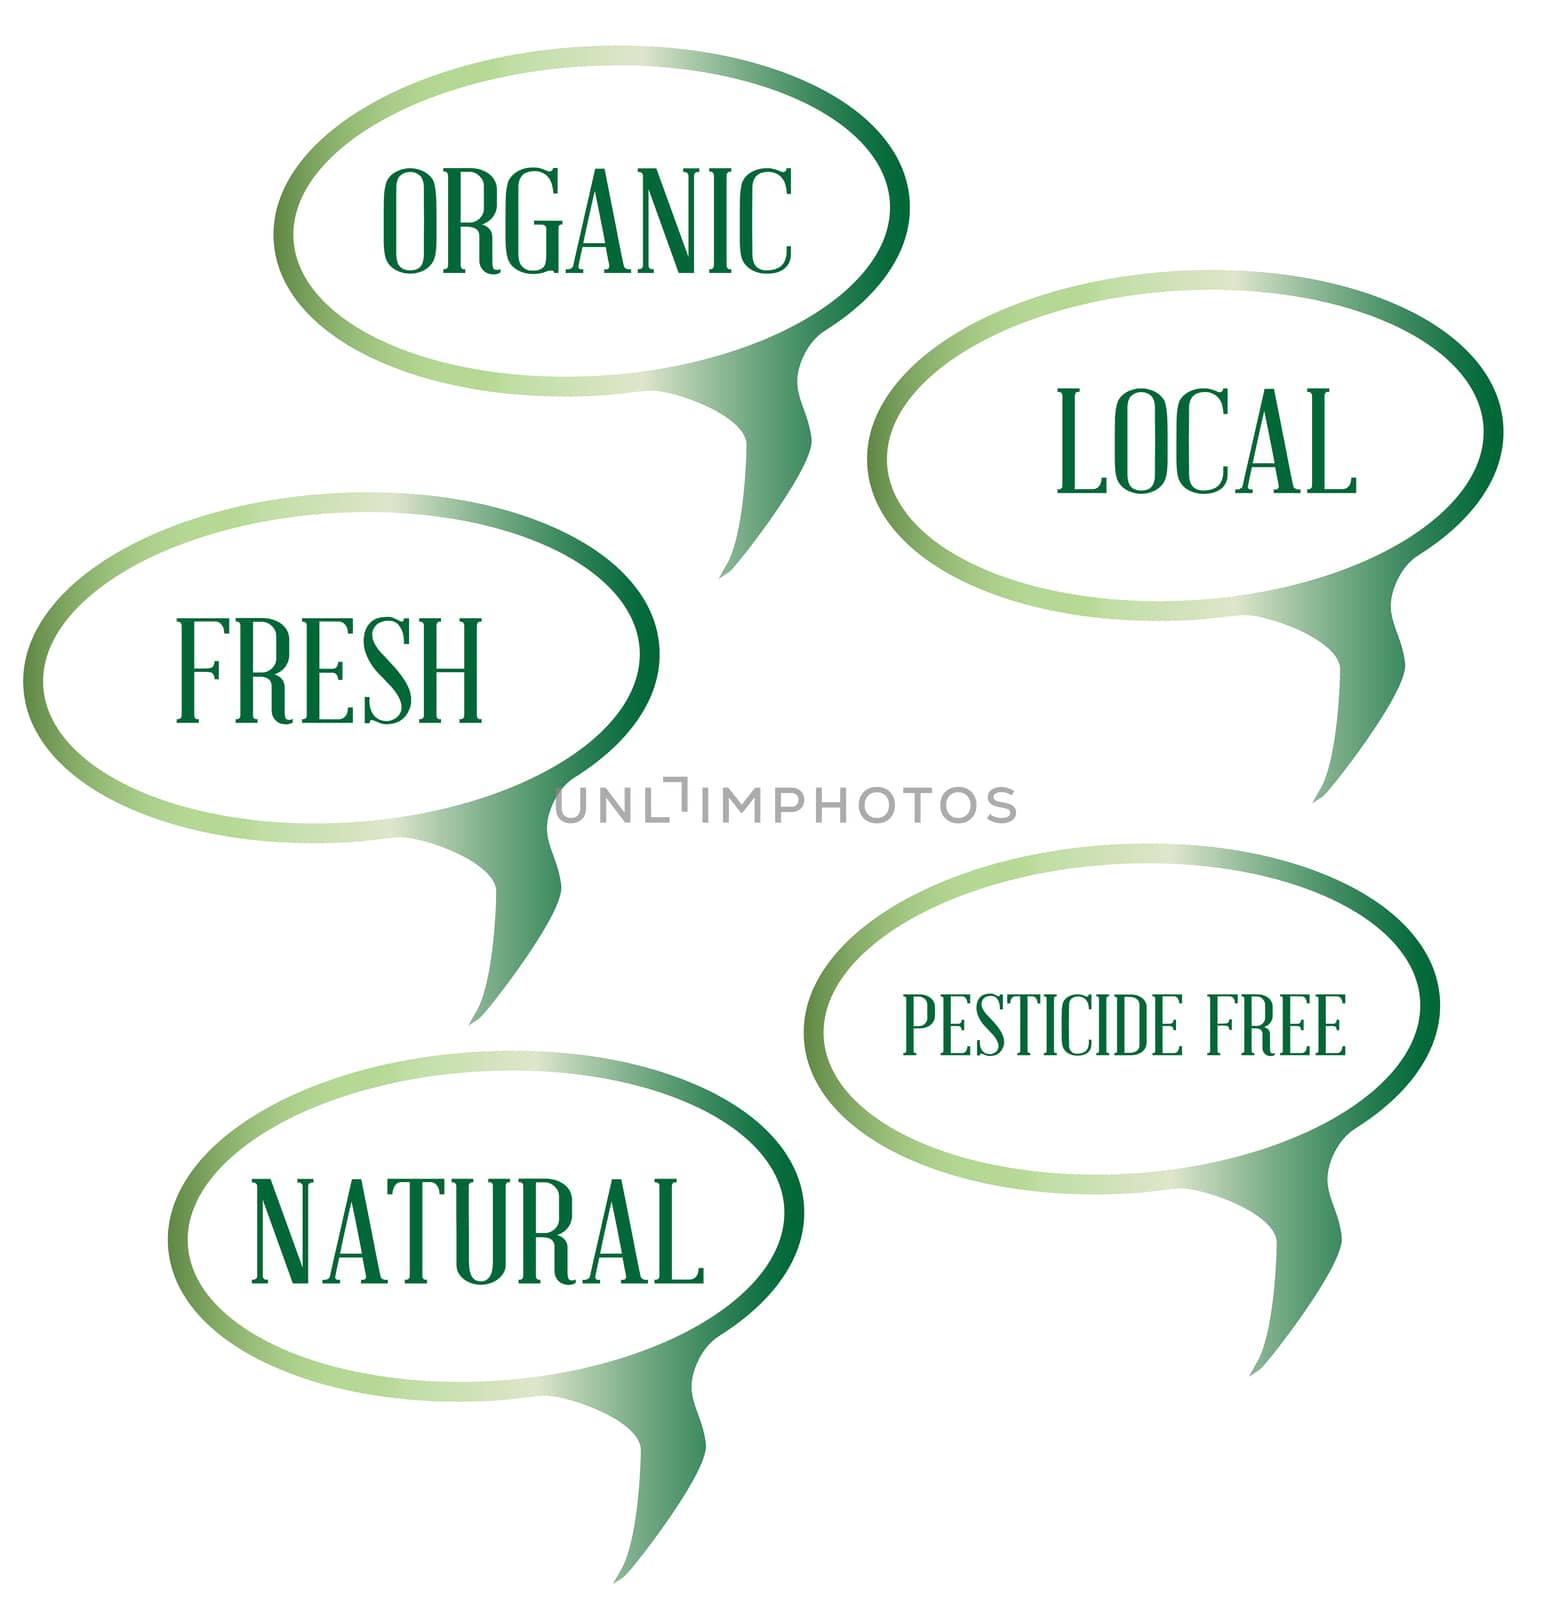 Organic and other speech bubbles in green over a white background